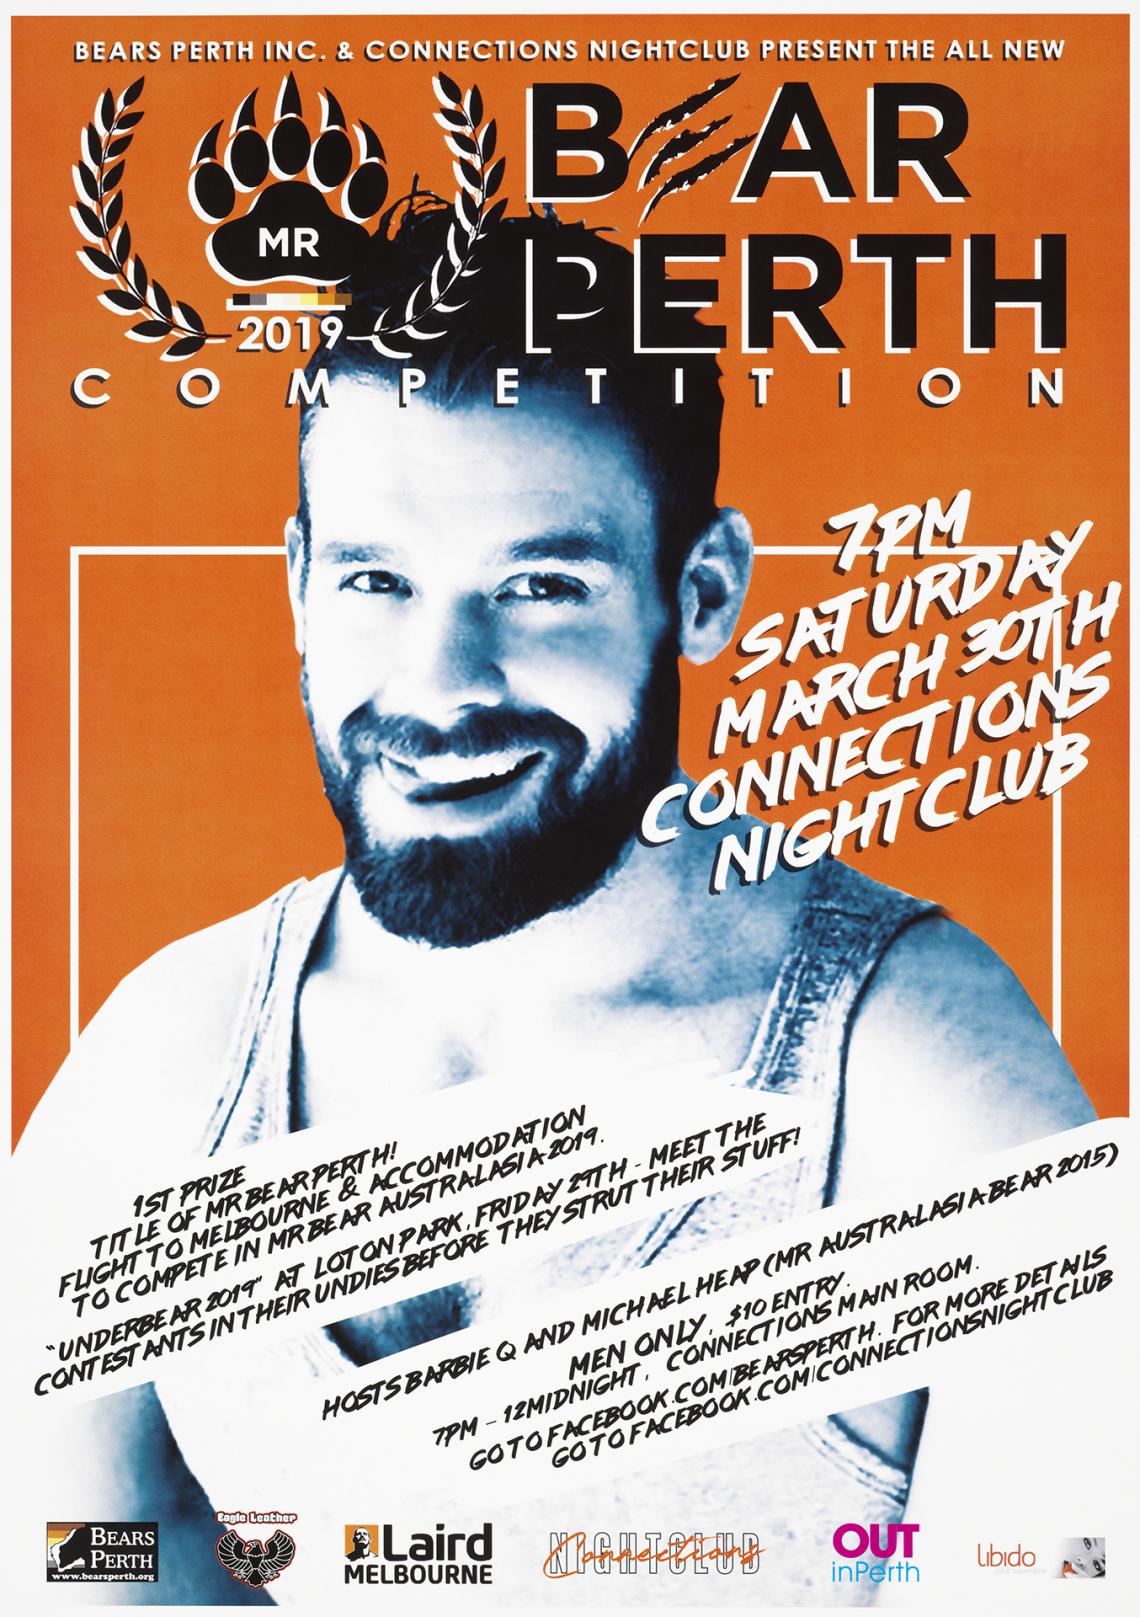 Connections Nightclub poster